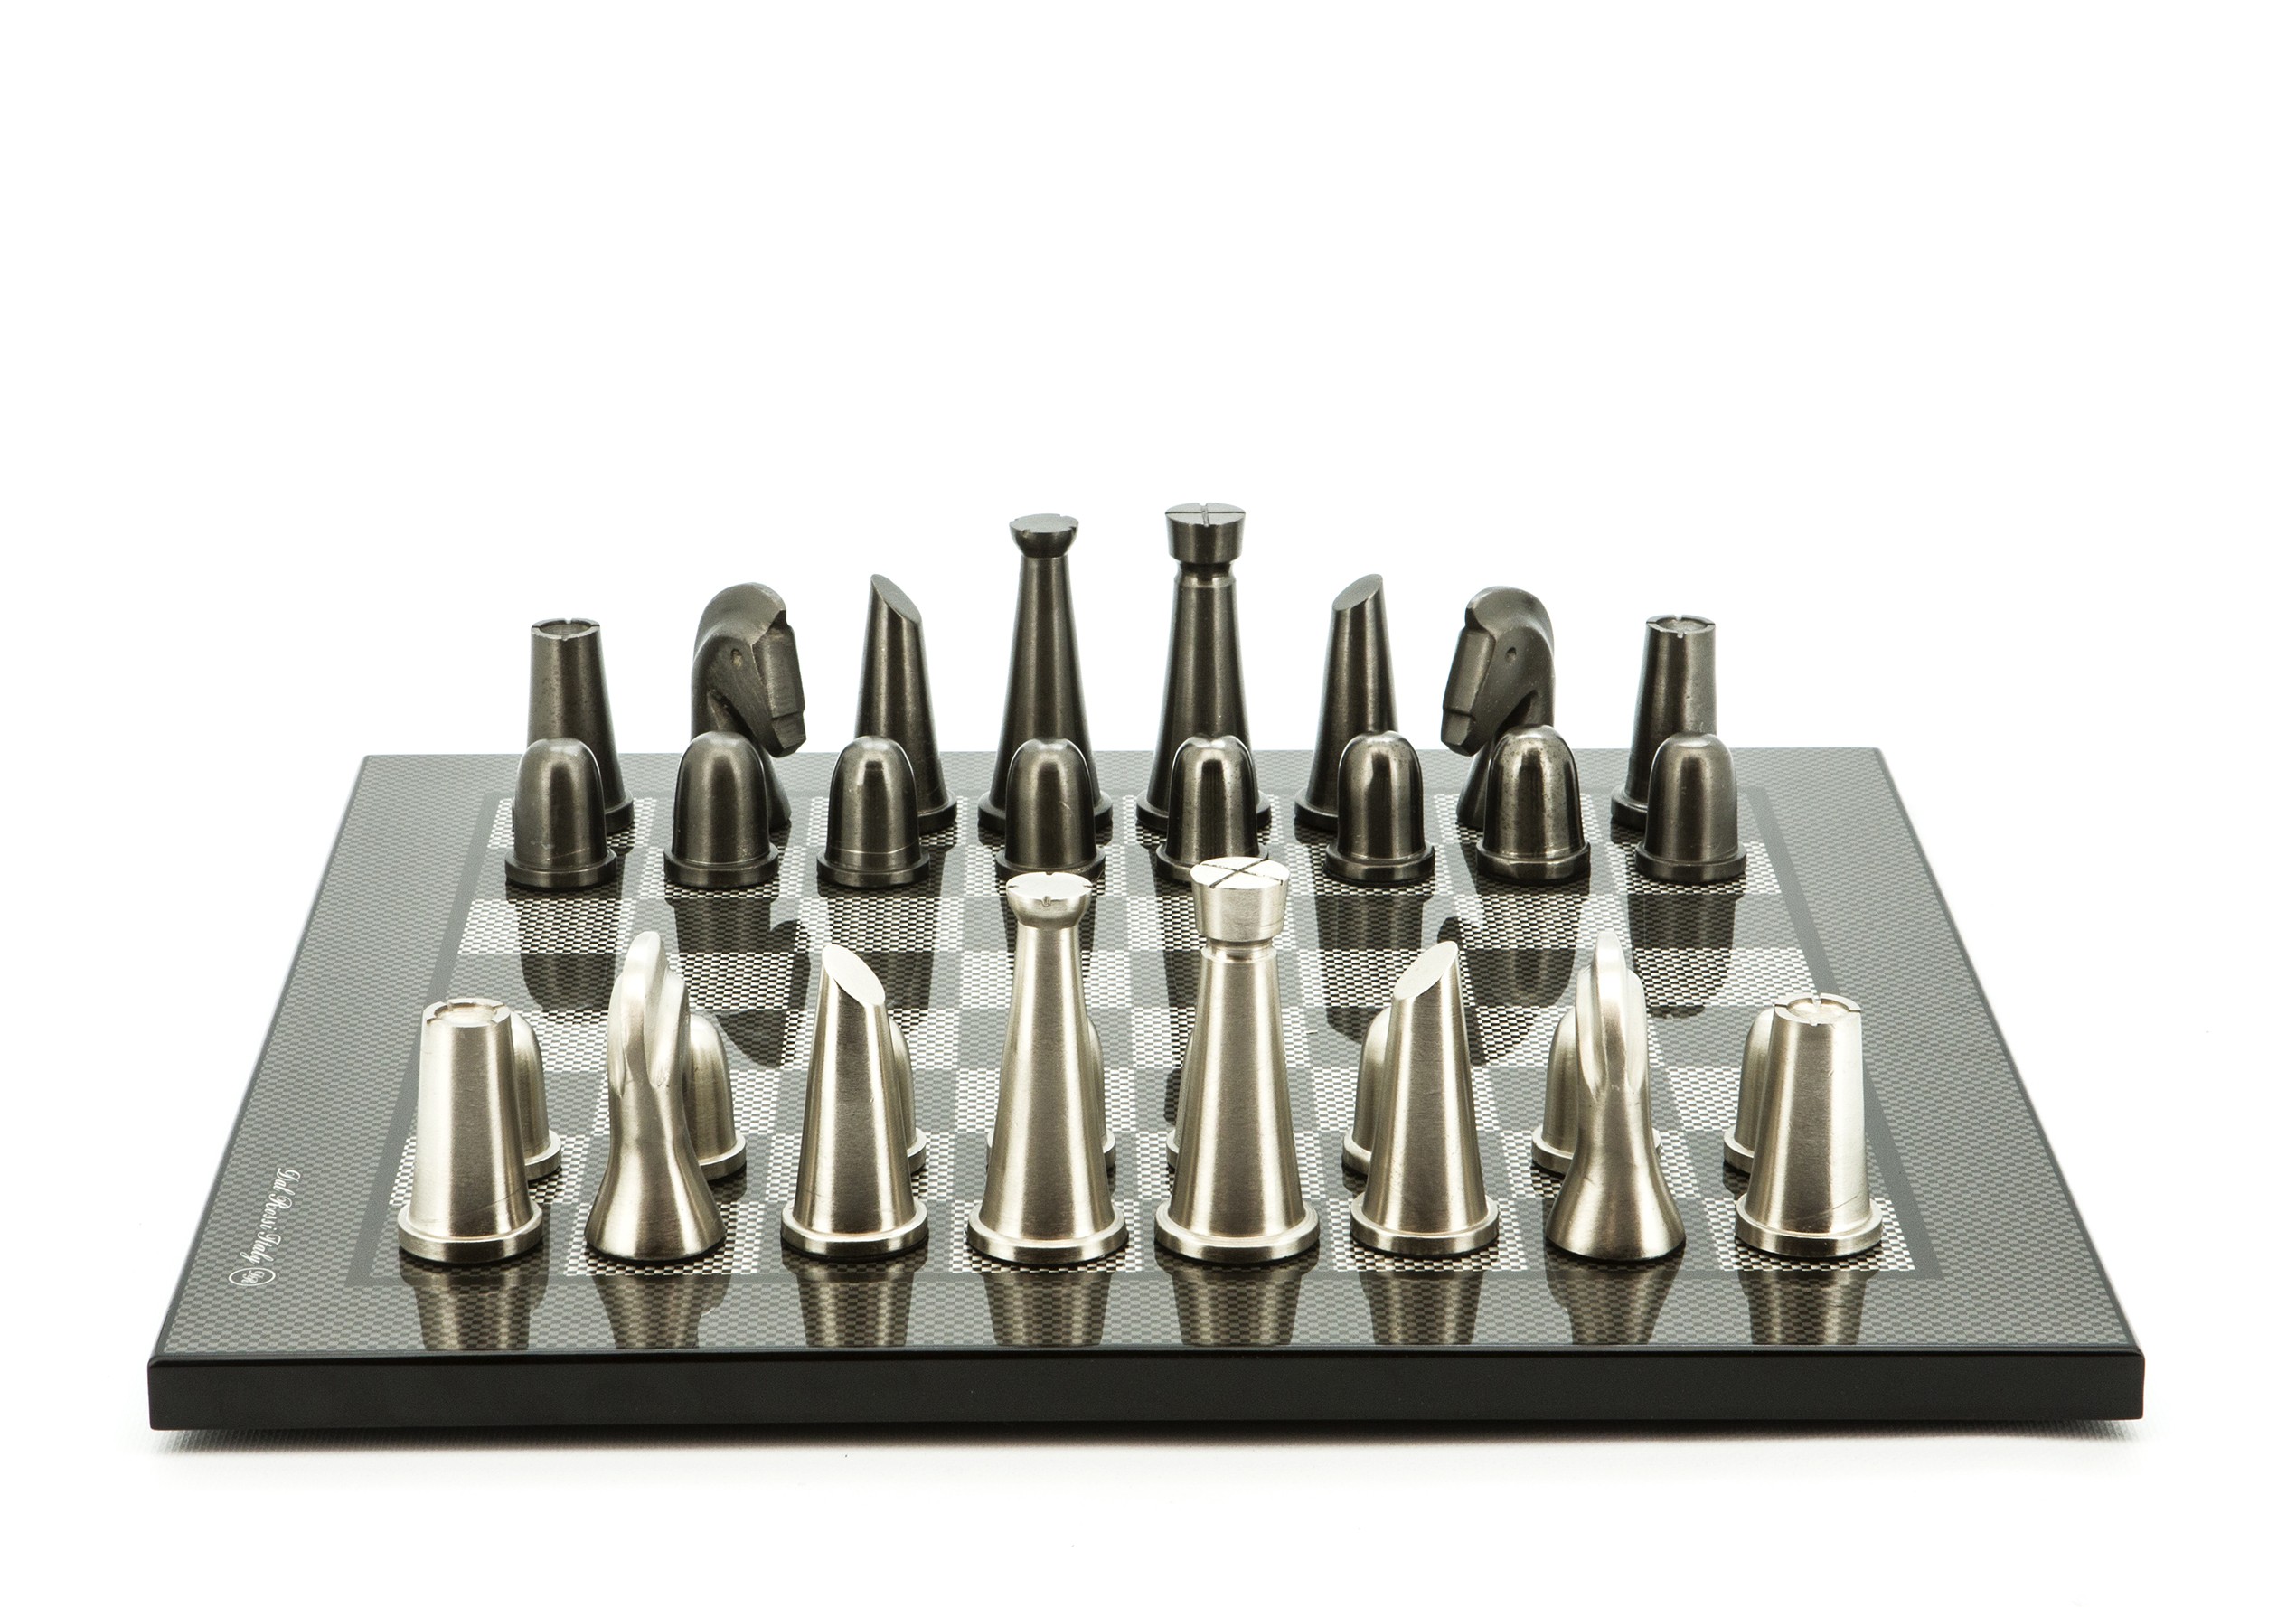 Dal Rossi Italy Chess Set Flat  Carbon Fibre Board 40cm, With Metal Dark Titanium and Silver chessmen 85mm